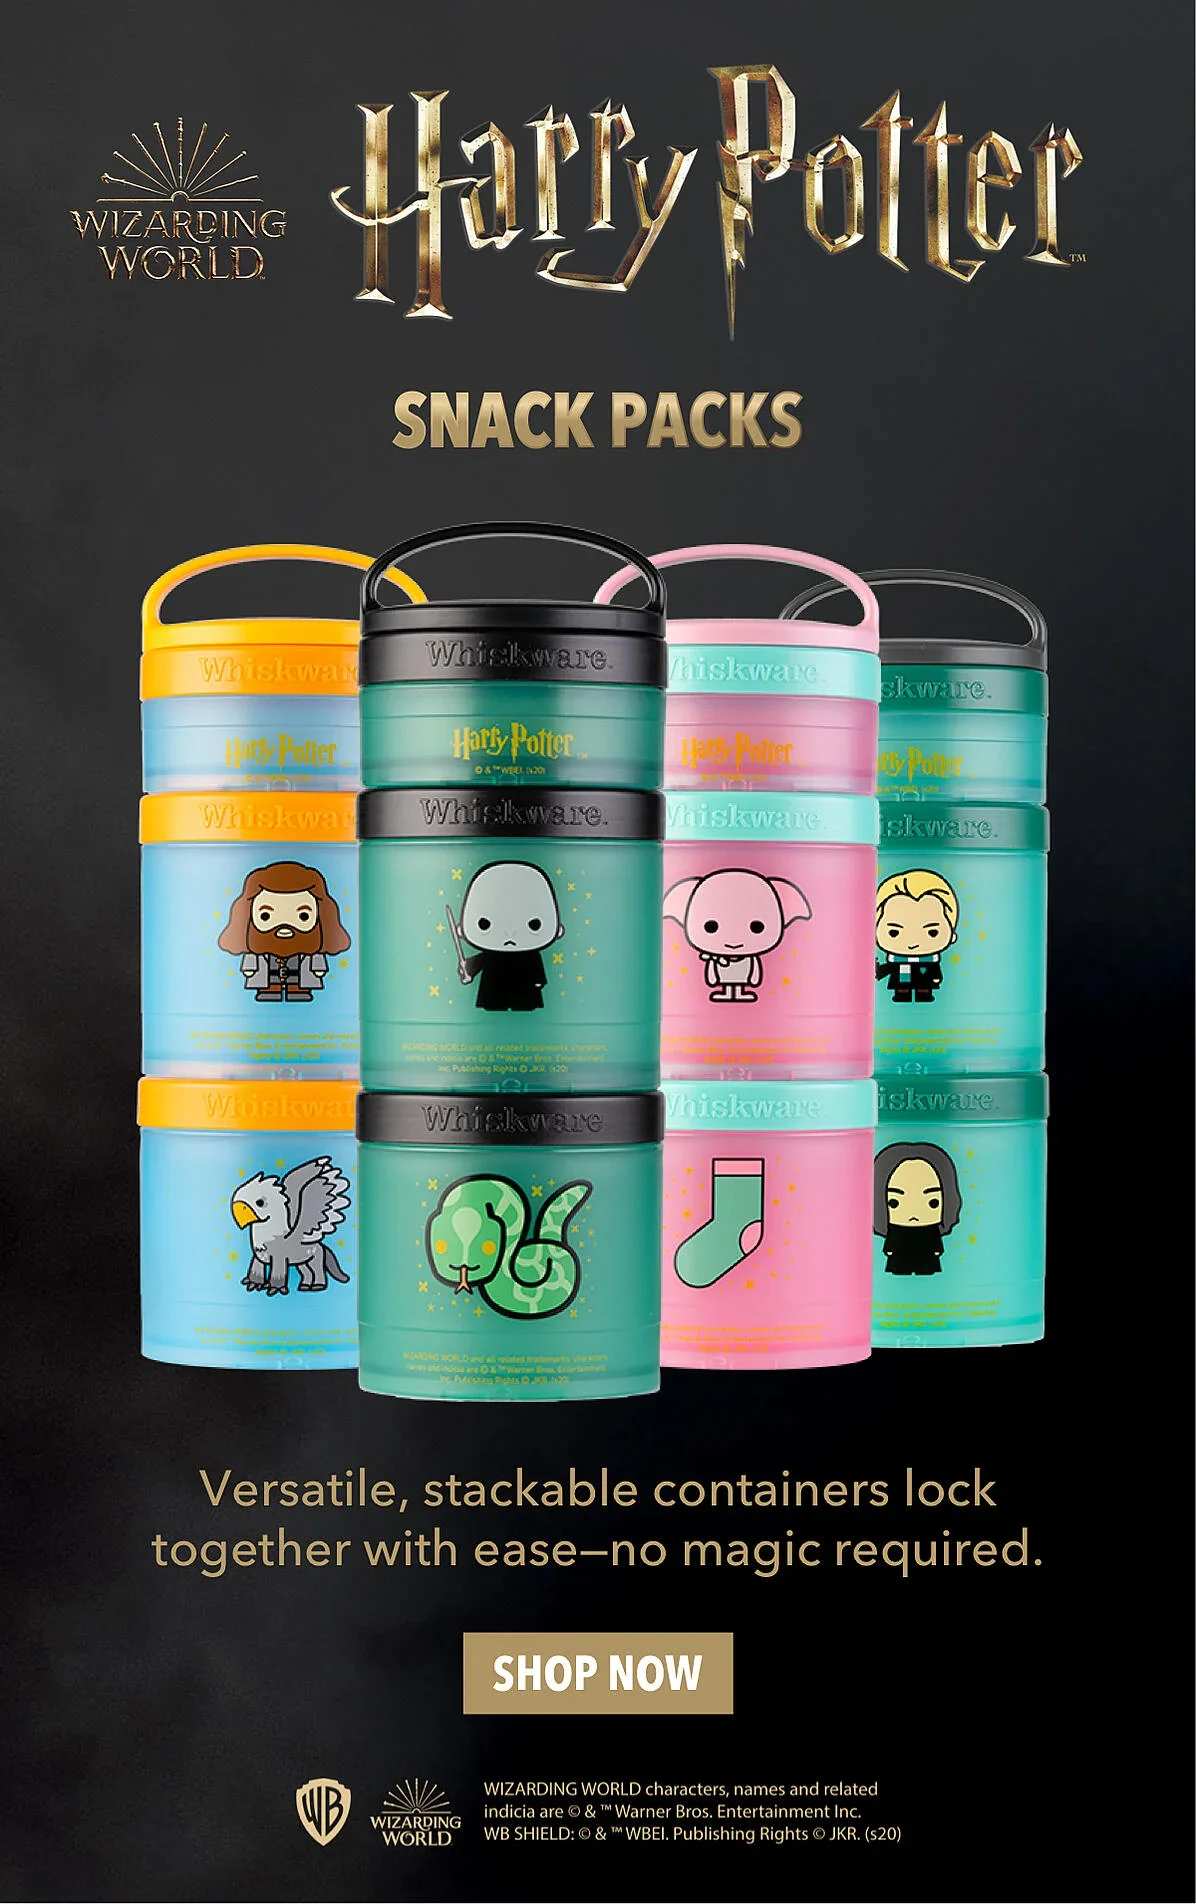 Whiskware Stackable Snack Packs Pixar Collection Now Available! (+